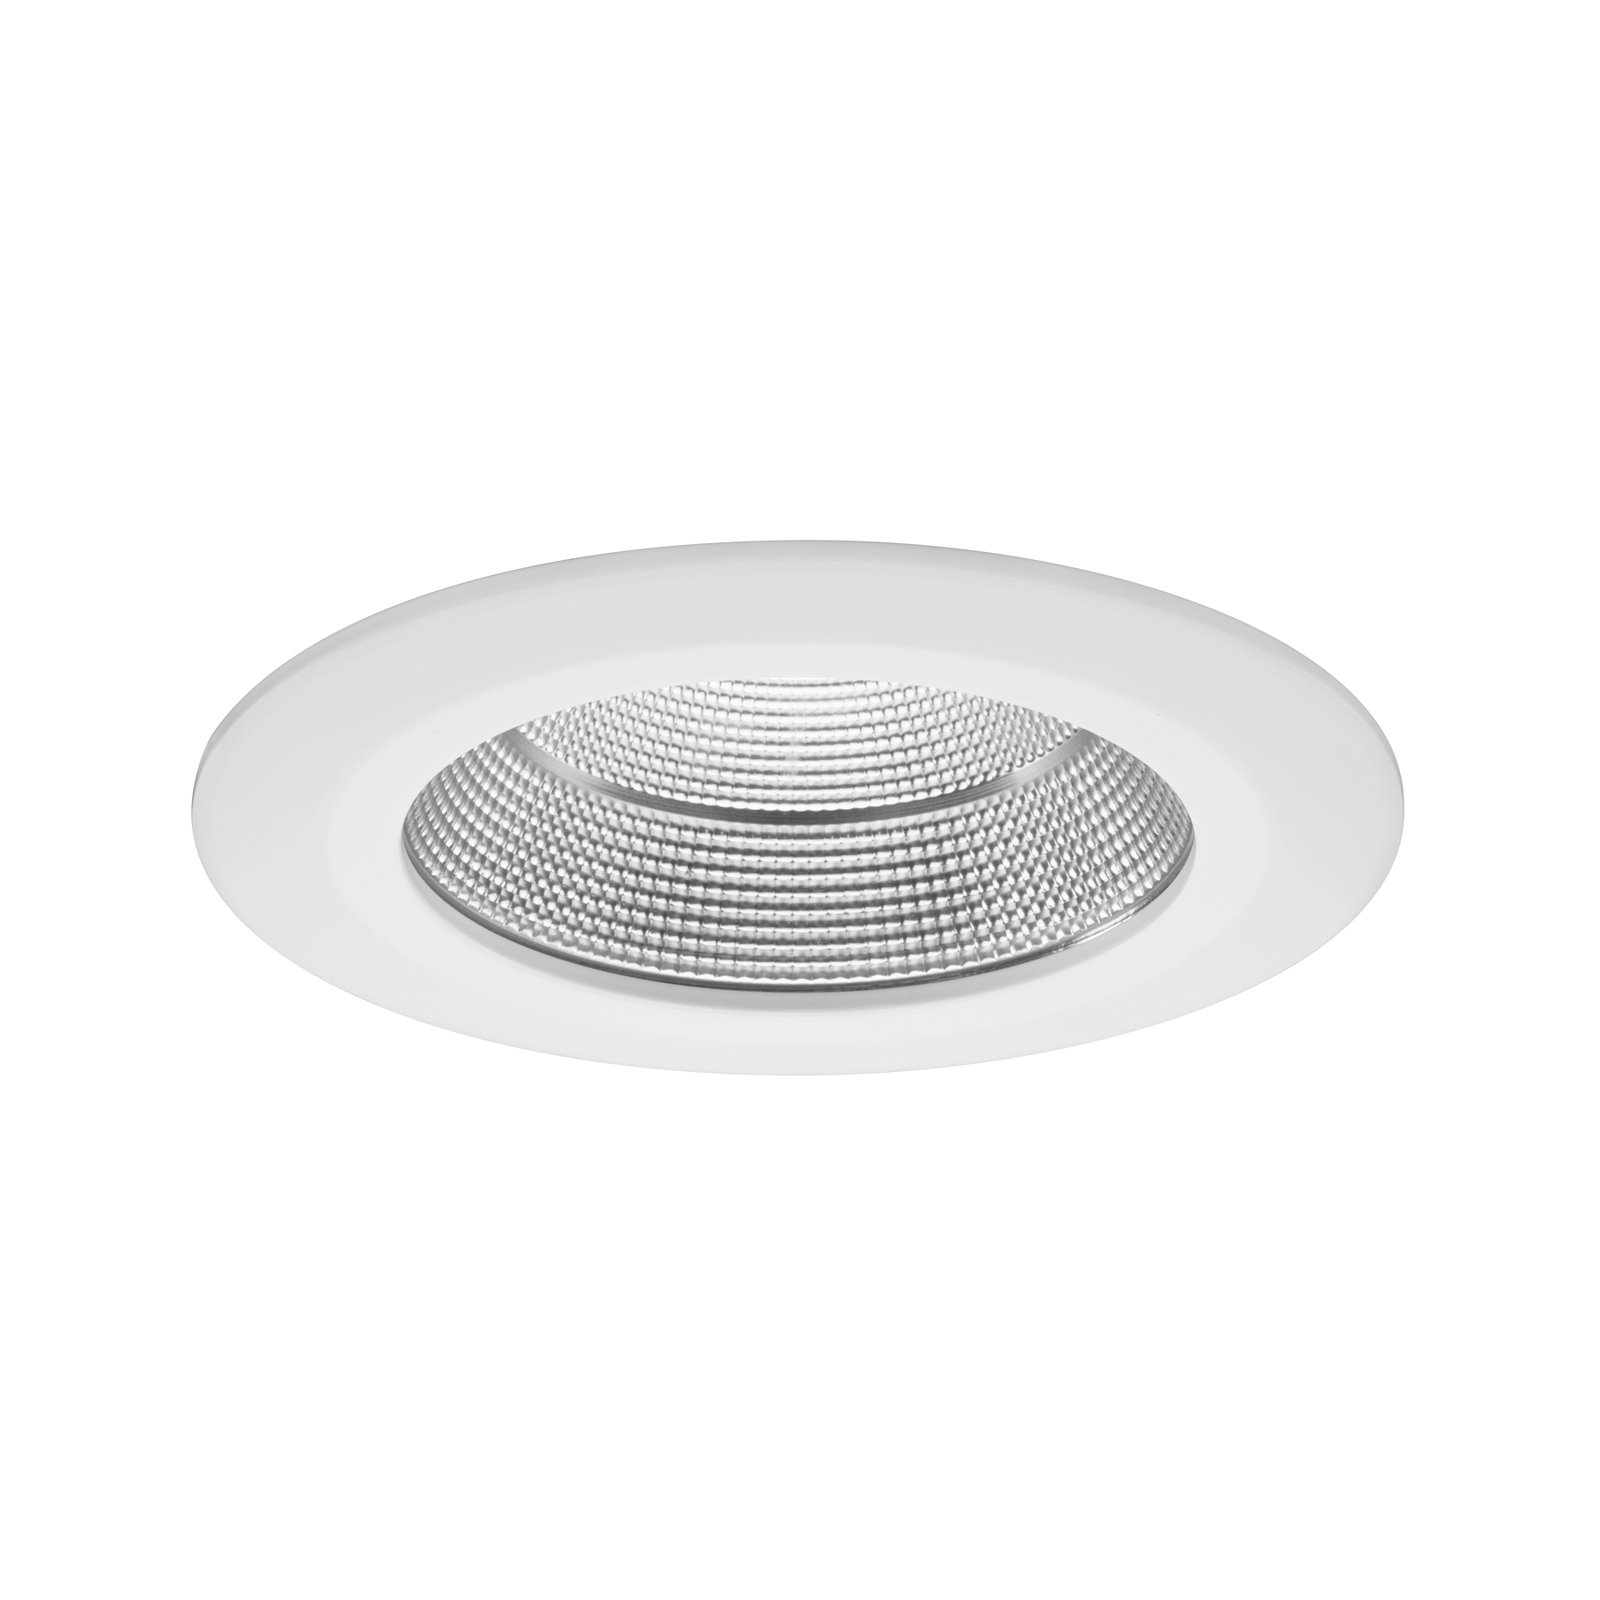 BRUMBERG LED recessed downlight Lydon Maxi, on/off, 4,000 K